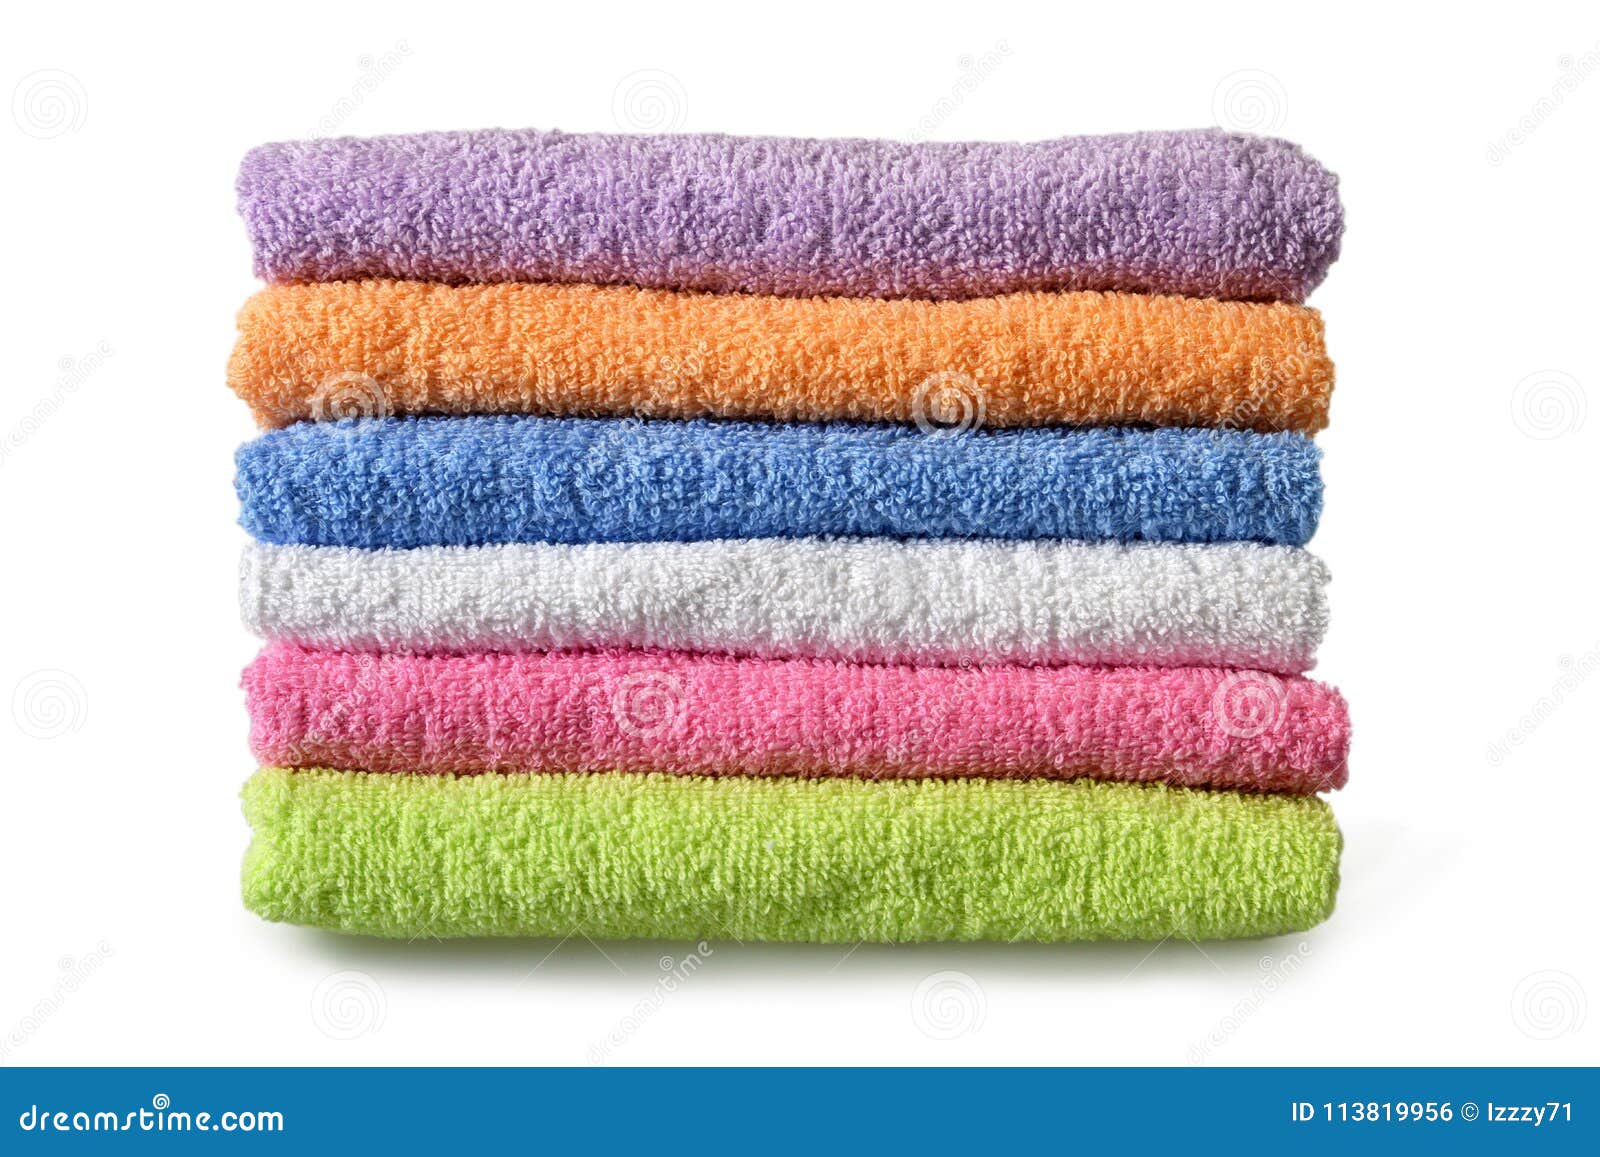 bath towels on white background